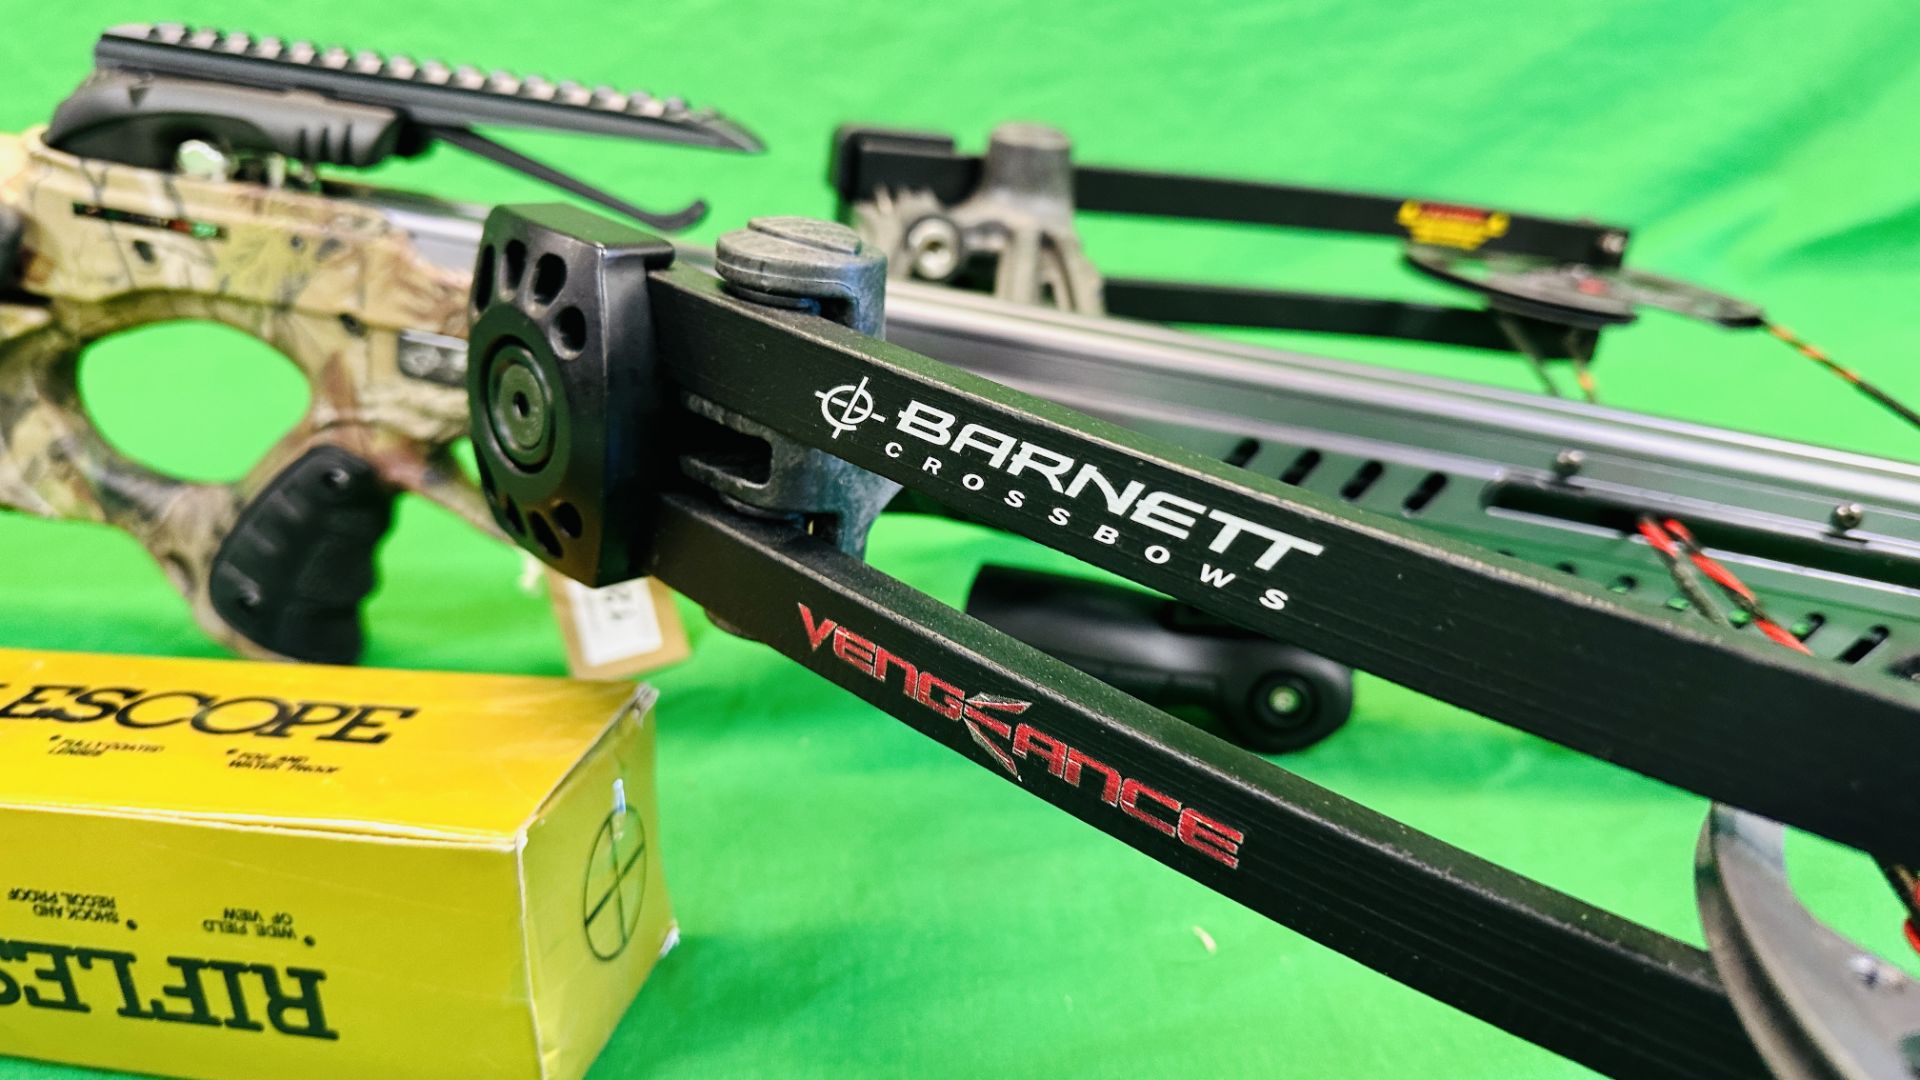 BARNETT "VENGANCE" COMPOUND CROSSBOW COMPLETE WITH THREE CARBON FIBRE CROSSBOW BOLTS, QUIVER, - Image 7 of 35